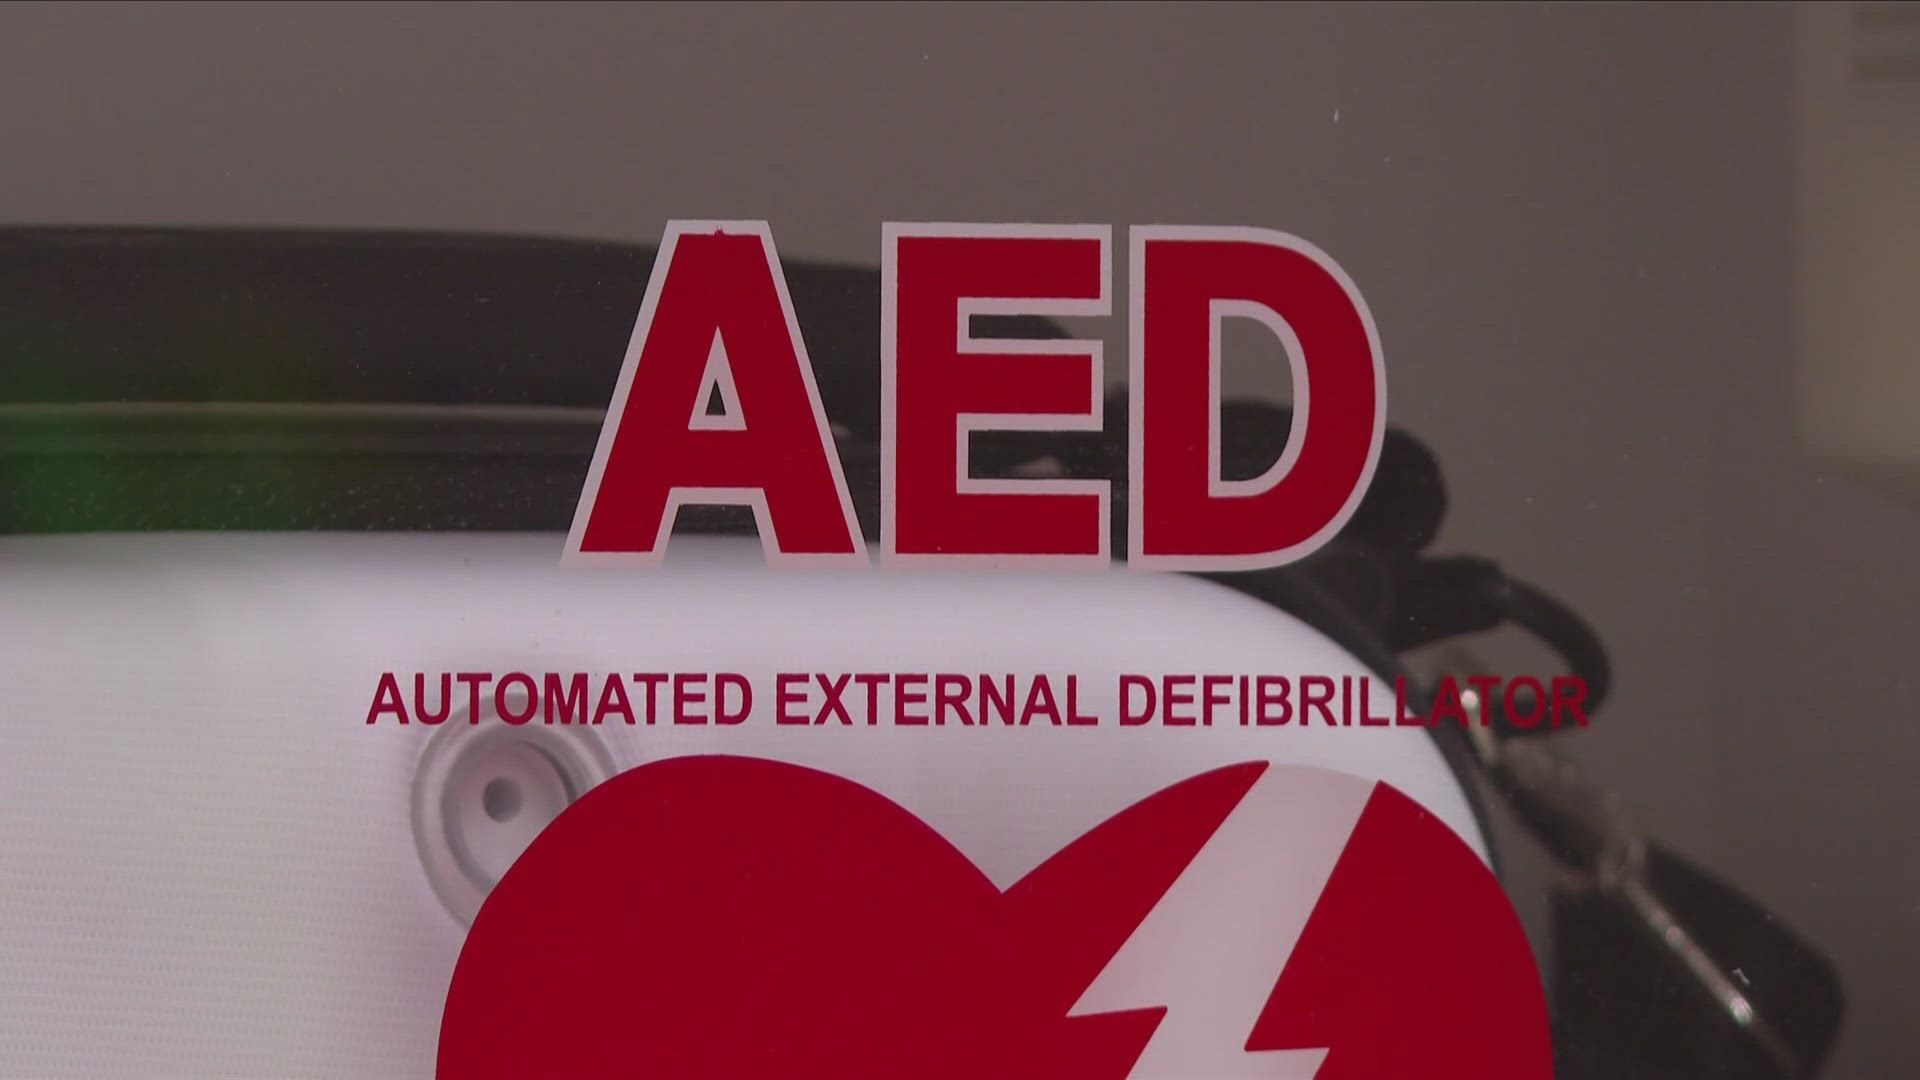 The "Smart Heart Act" mandates all high schools have accessible automated external defibrillators during the school day and athletic activities.